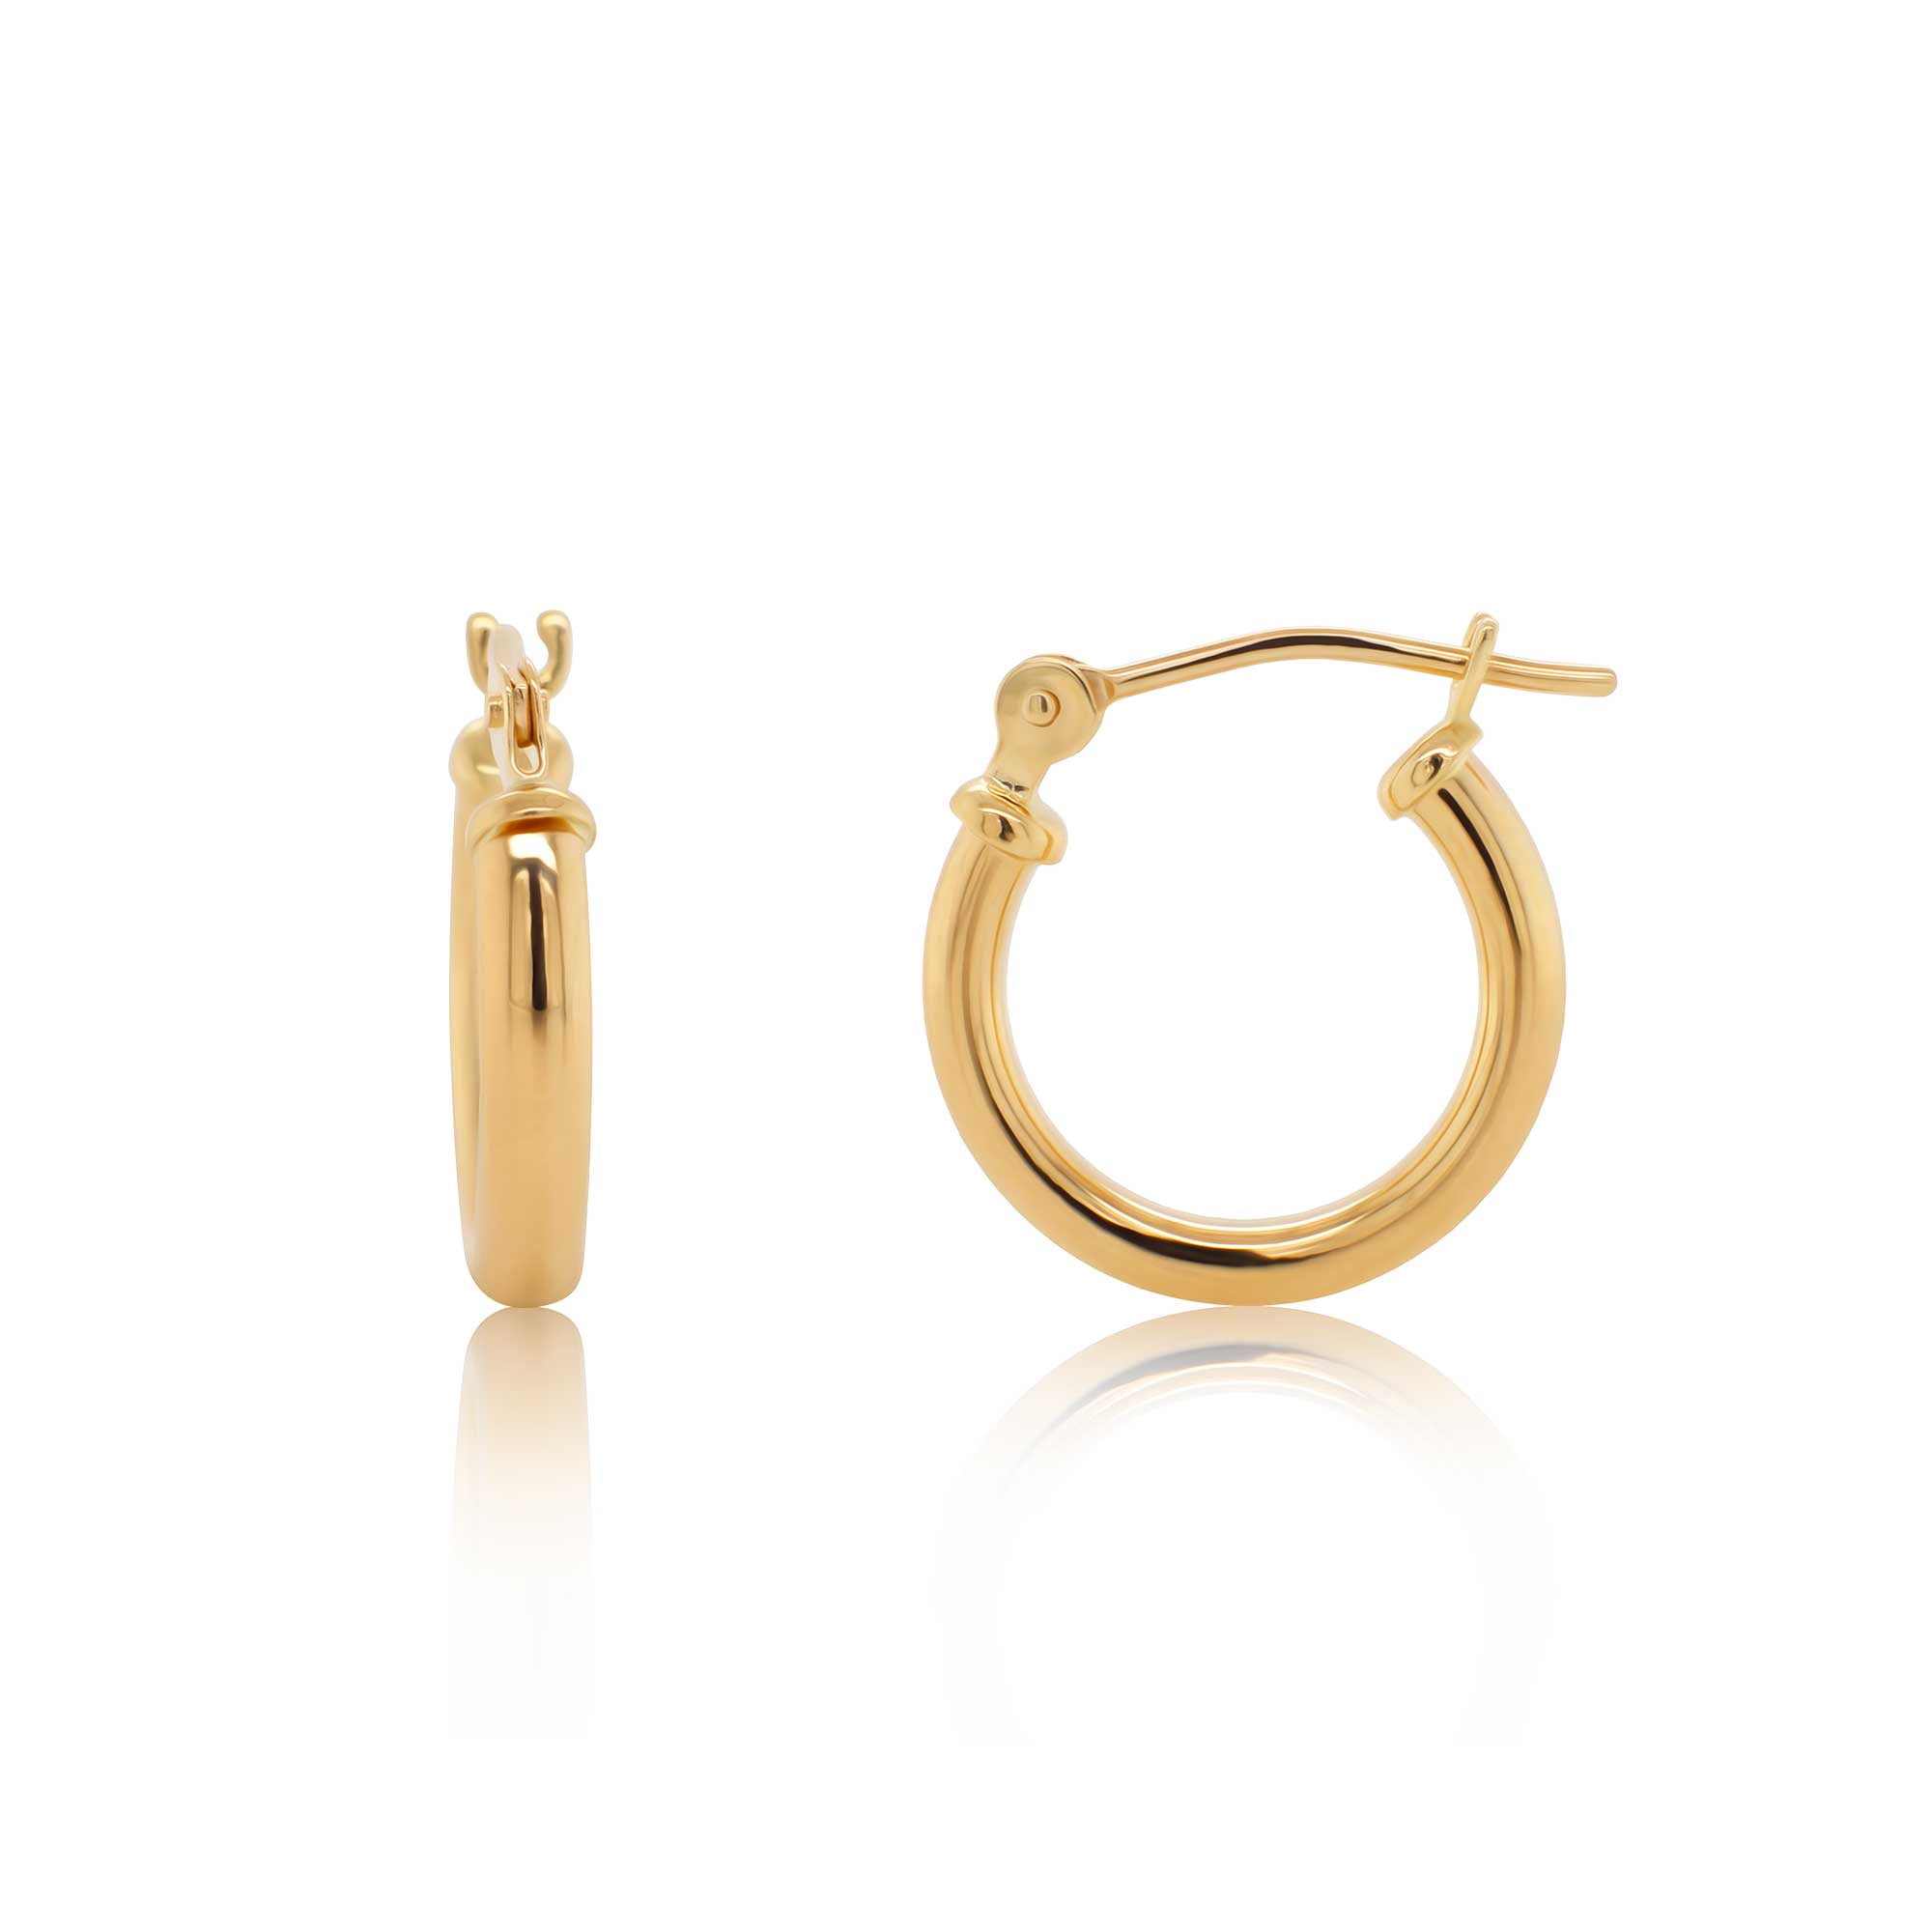 14K Yellow Gold Polished Small 2mm Hoop Earrings for Women - 12mm (0.45